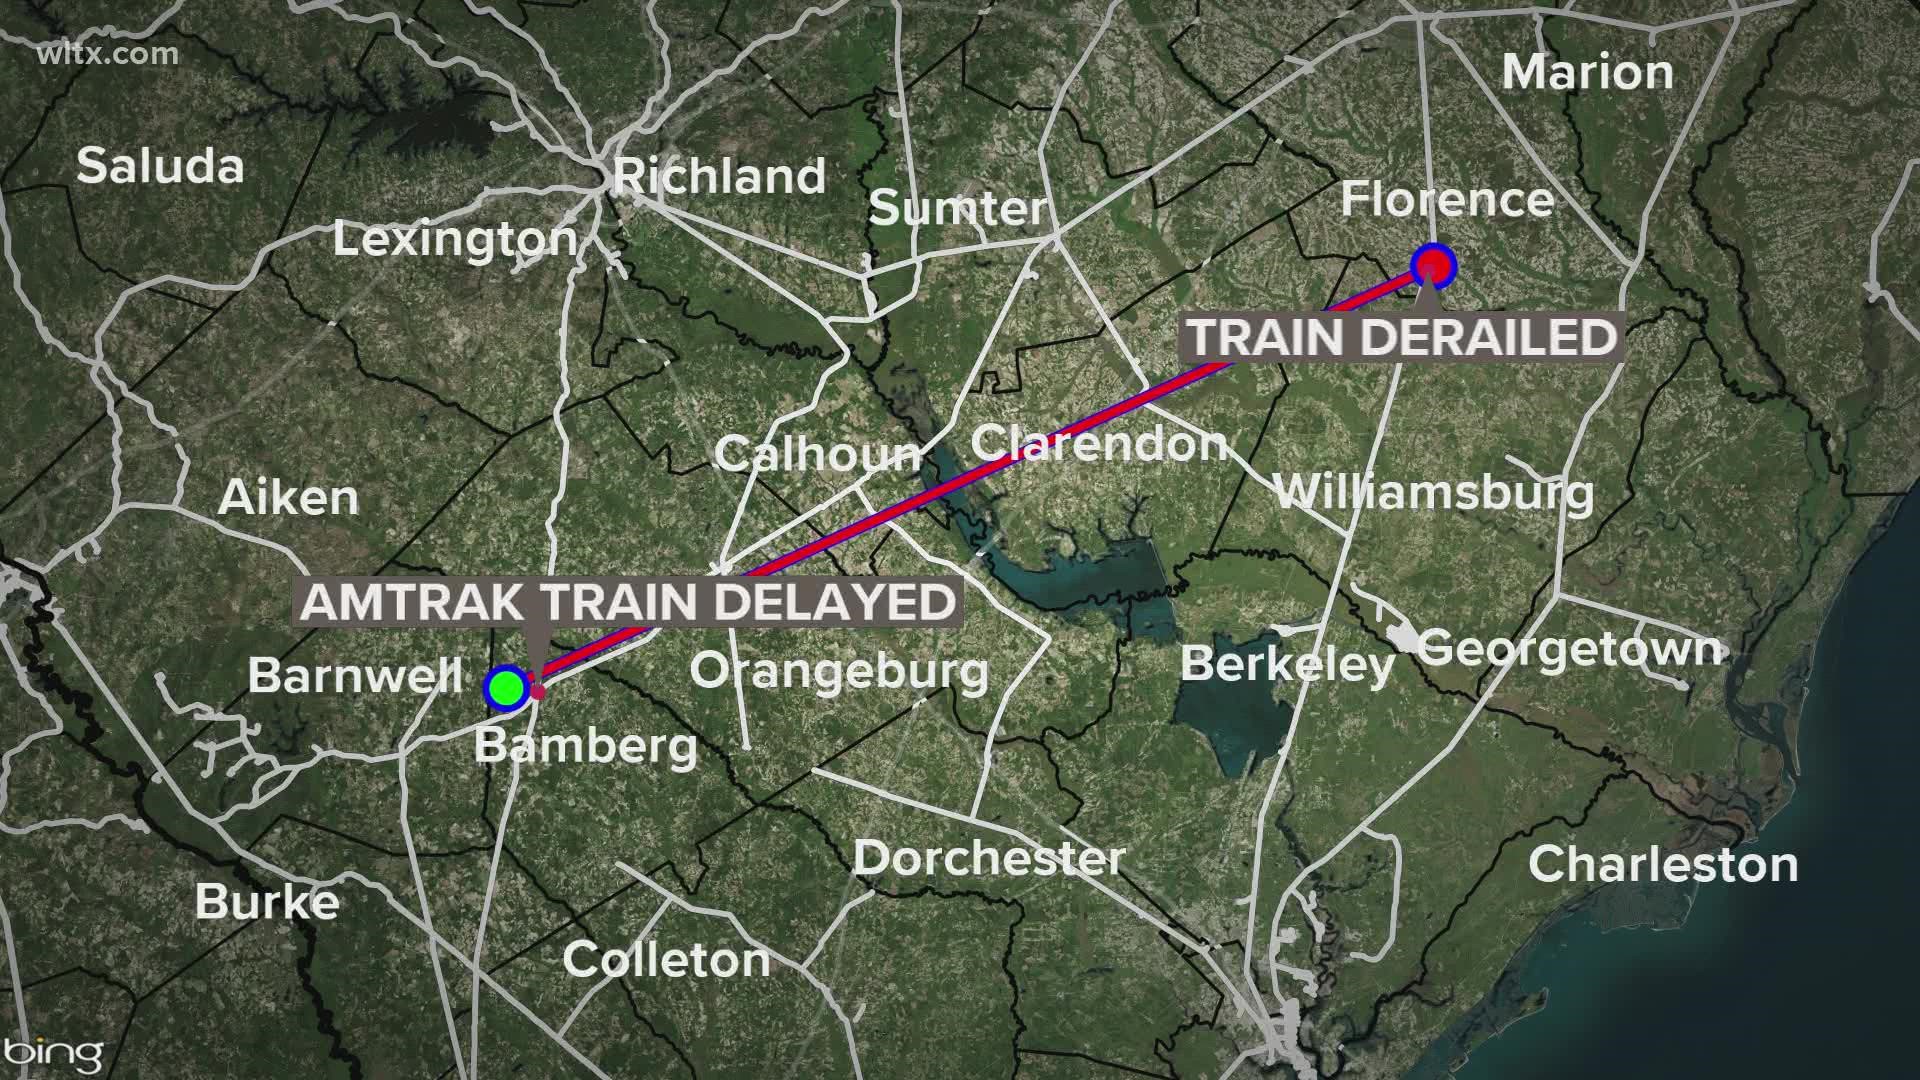 The train is delayed due to a CSX freight crash that happened Monday night.